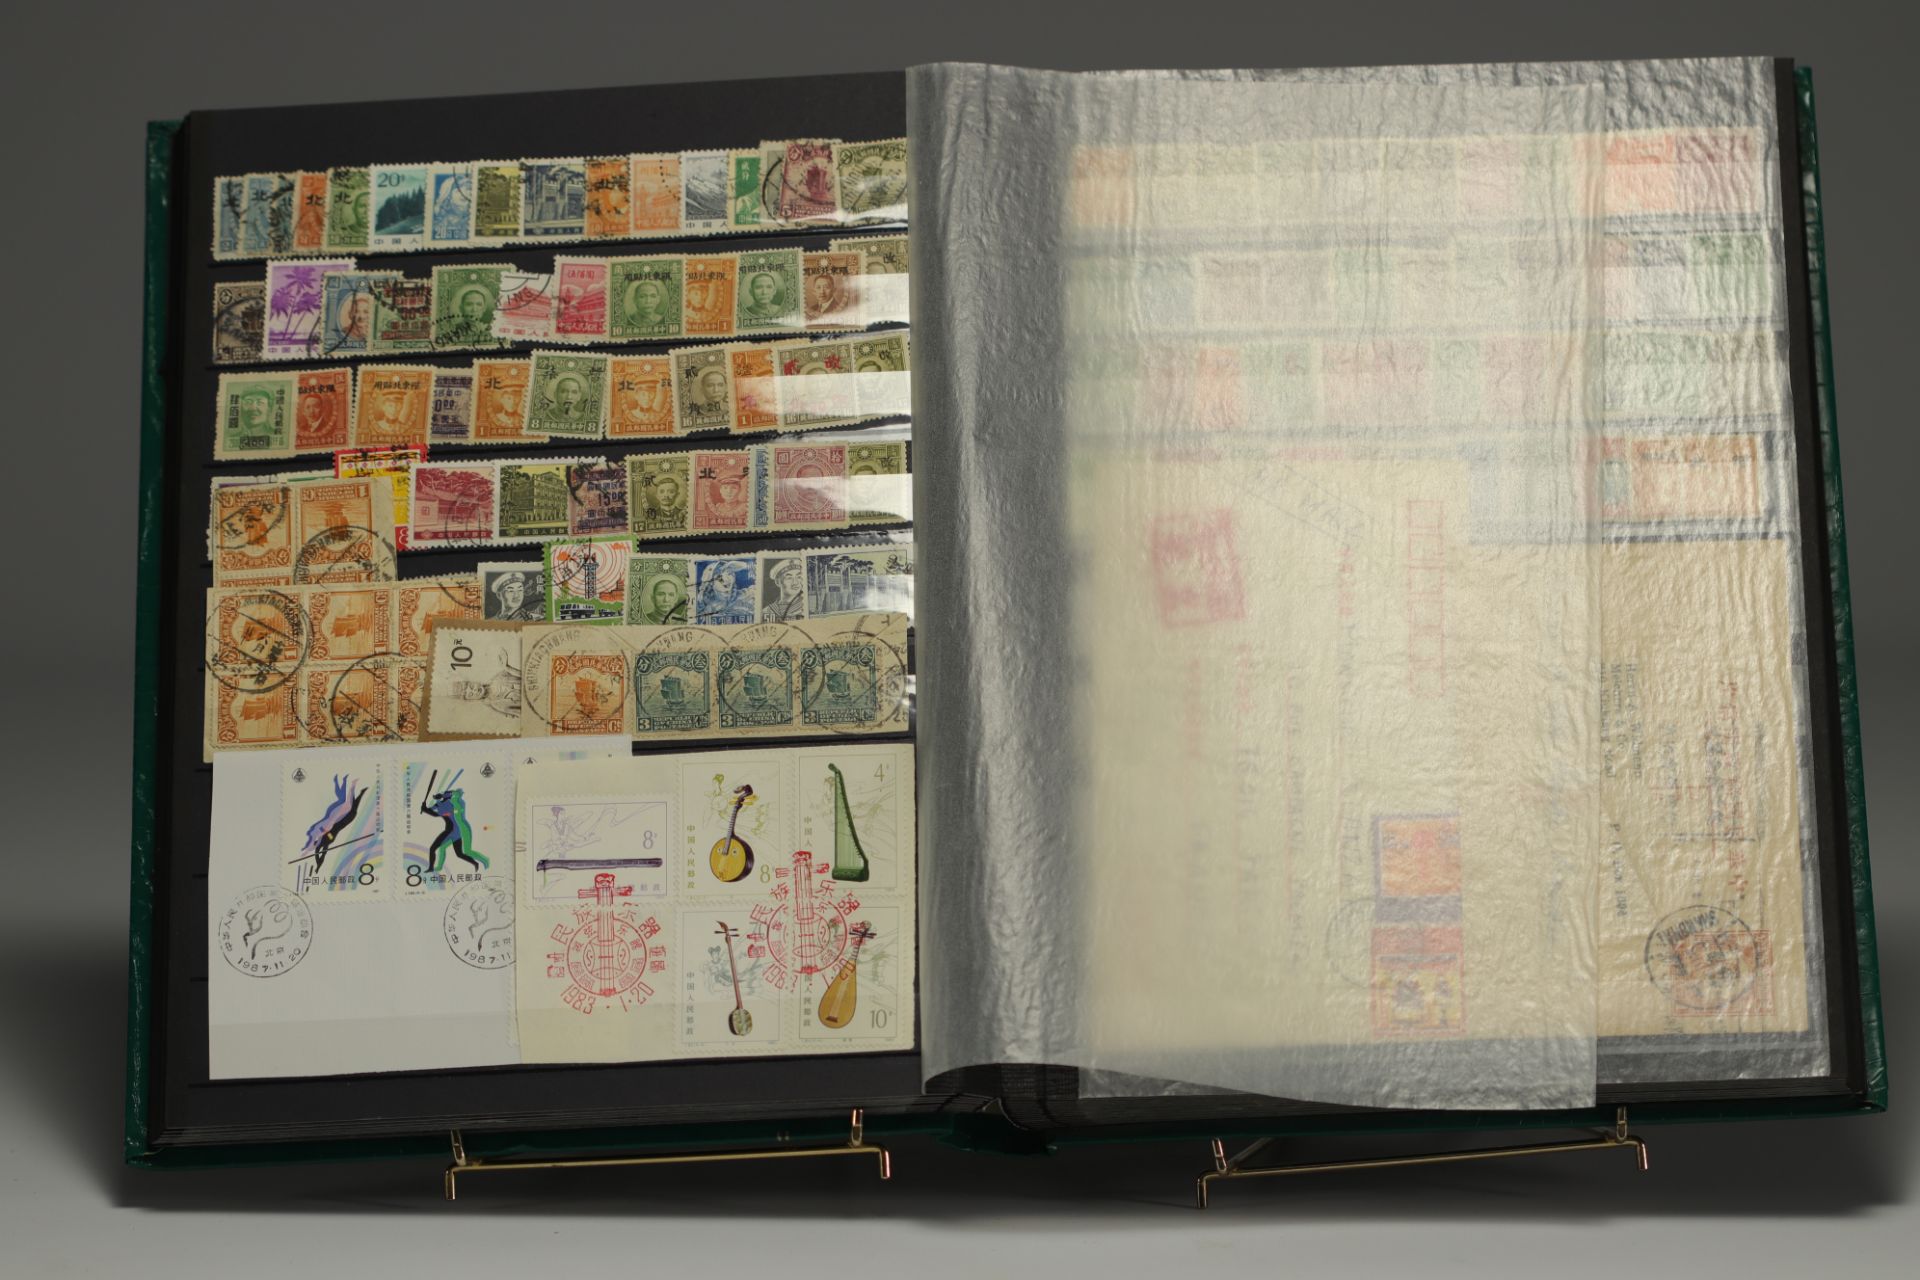 Set of 21 albums of world stamps, China, Japan, Middle East, Europe, etc. (Batch 1) - Image 11 of 14